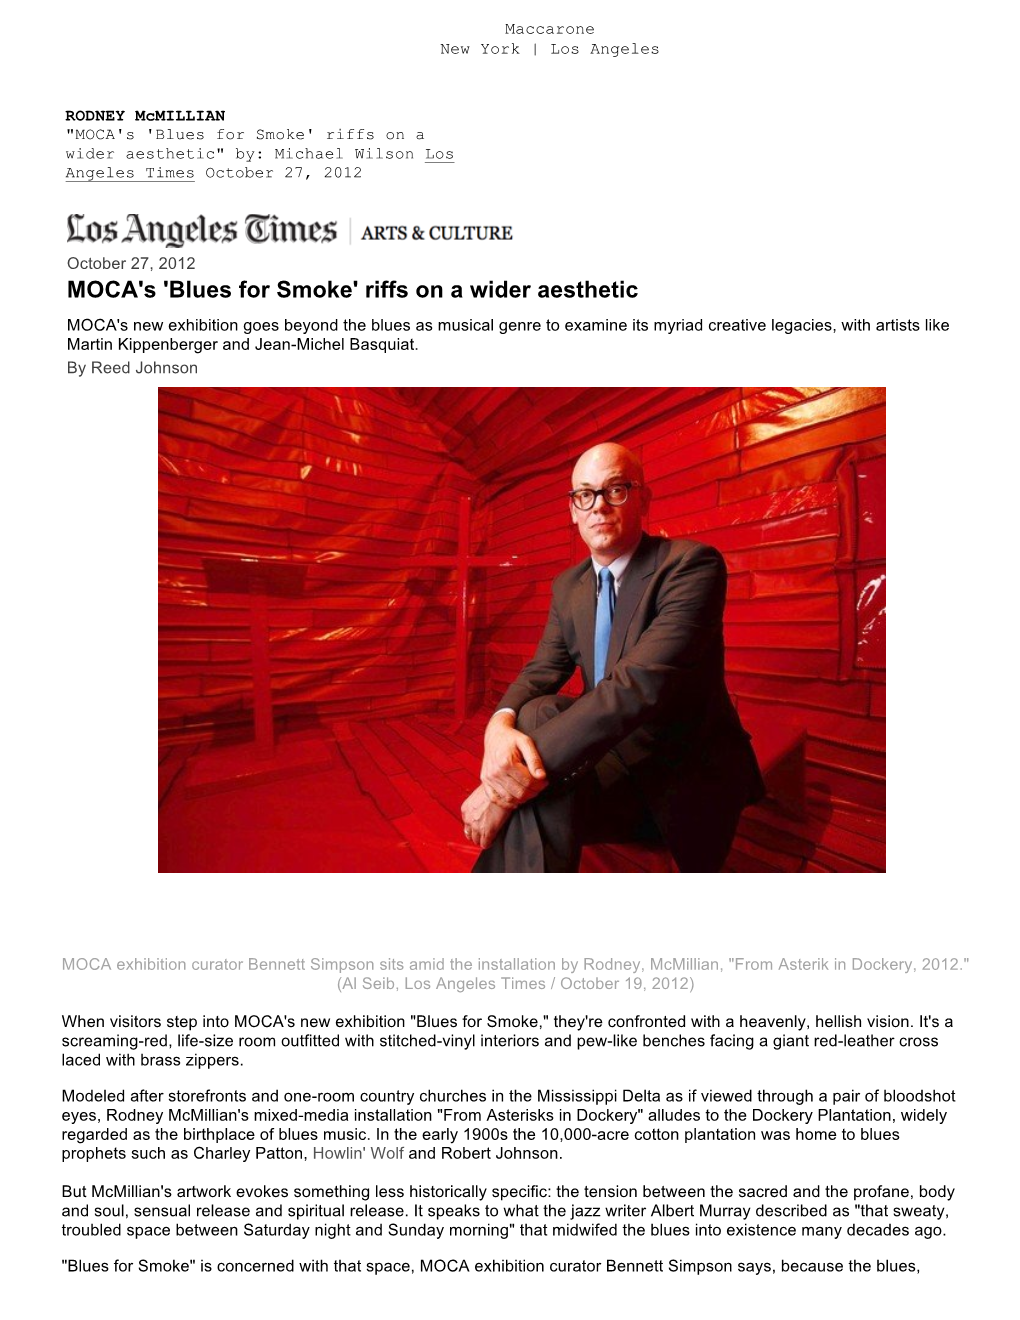 MOCA's 'Blues for Smoke' Riffs on a Wider Aesthetic" By: Michael Wilson Los Angeles Times October 27, 2012